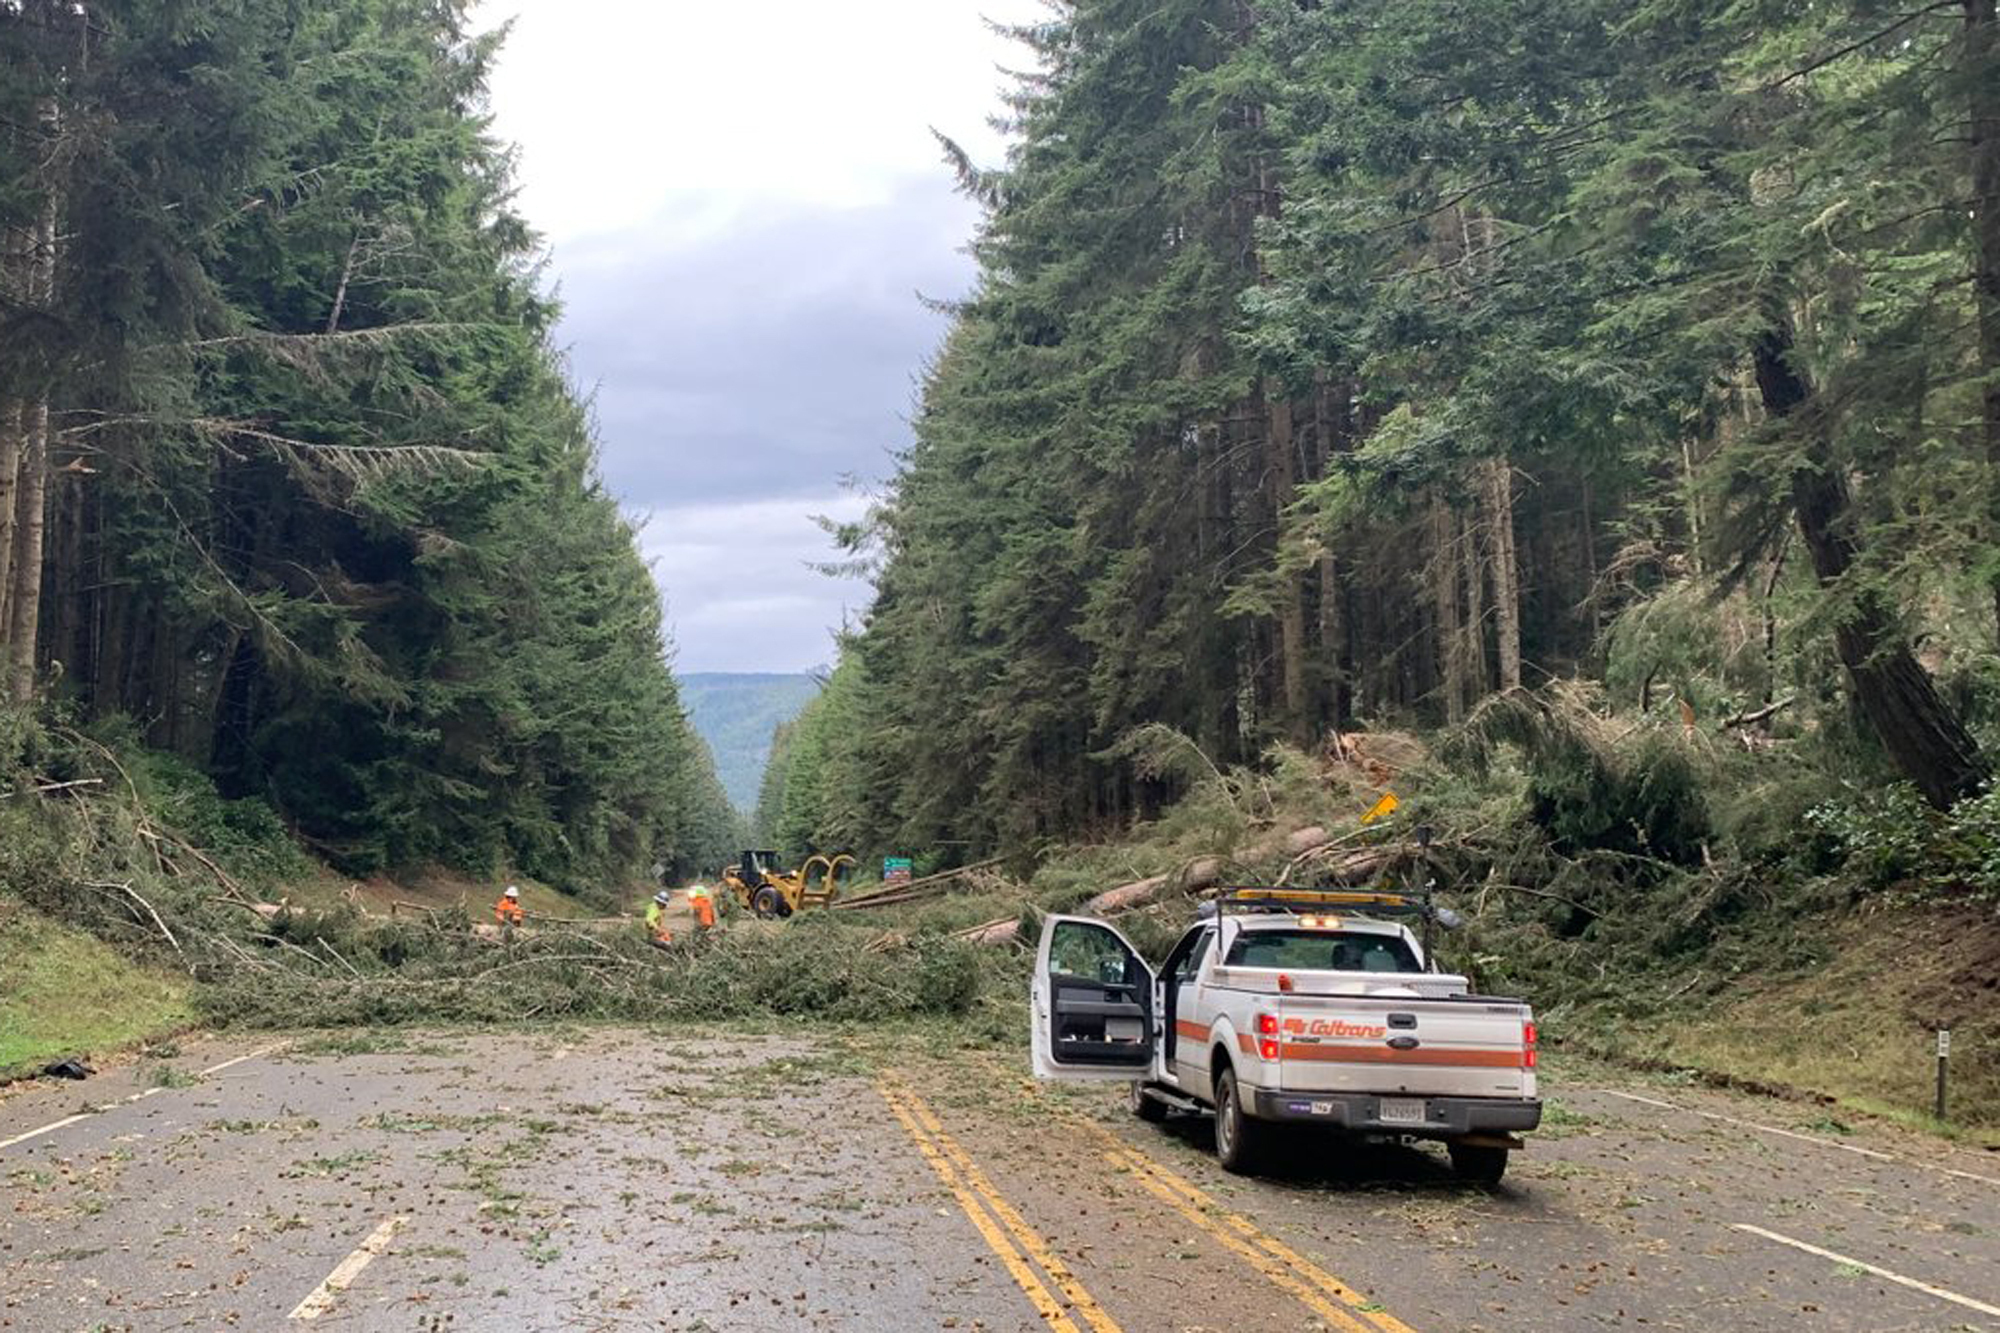 In this photo released by Caltrans District 1, crews remove multiple downed trees that intersect the 101 Freeway in Humboldt County, near Trinidad, Calif., on Jan. 4, 2023. (Caltrans District 1 via AP)